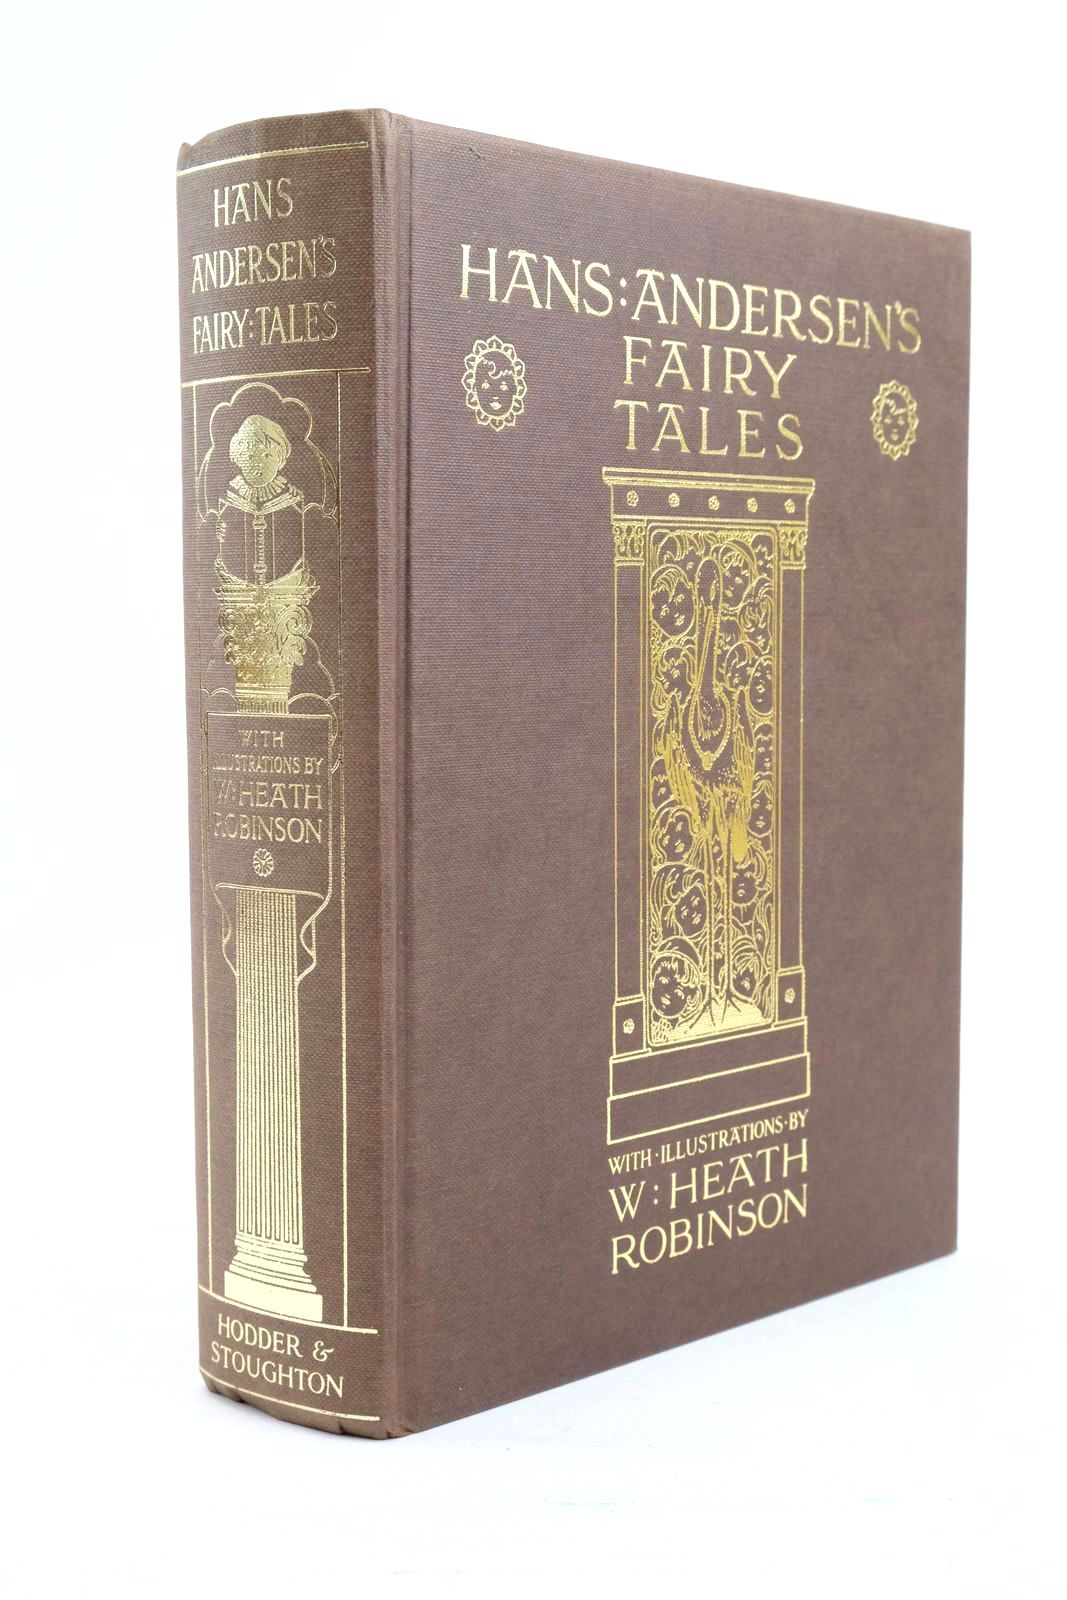 Photo of HANS ANDERSEN'S FAIRY TALES written by Andersen, Hans Christian illustrated by Robinson, W. Heath published by Hodder & Stoughton (STOCK CODE: 1320796)  for sale by Stella & Rose's Books